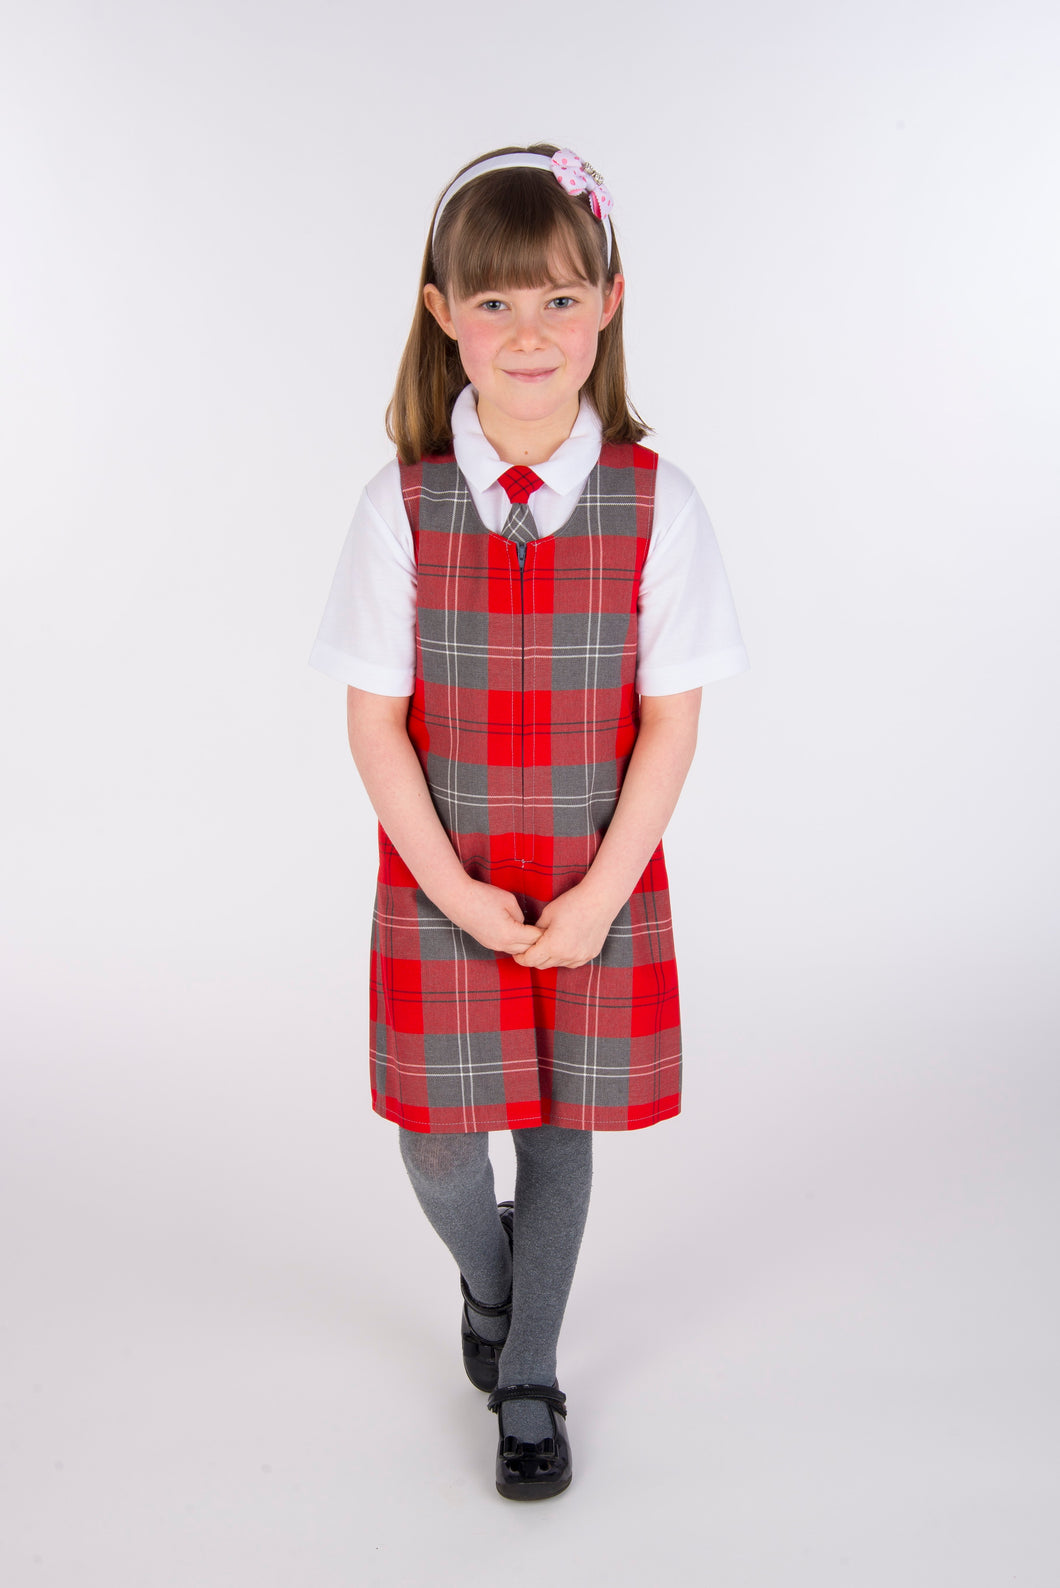 buy slim fit red and grey tartan school pinafore in size 3-4 4-5 5-6 6-7 7-8 8-9 9-10 11-11 11-12 13